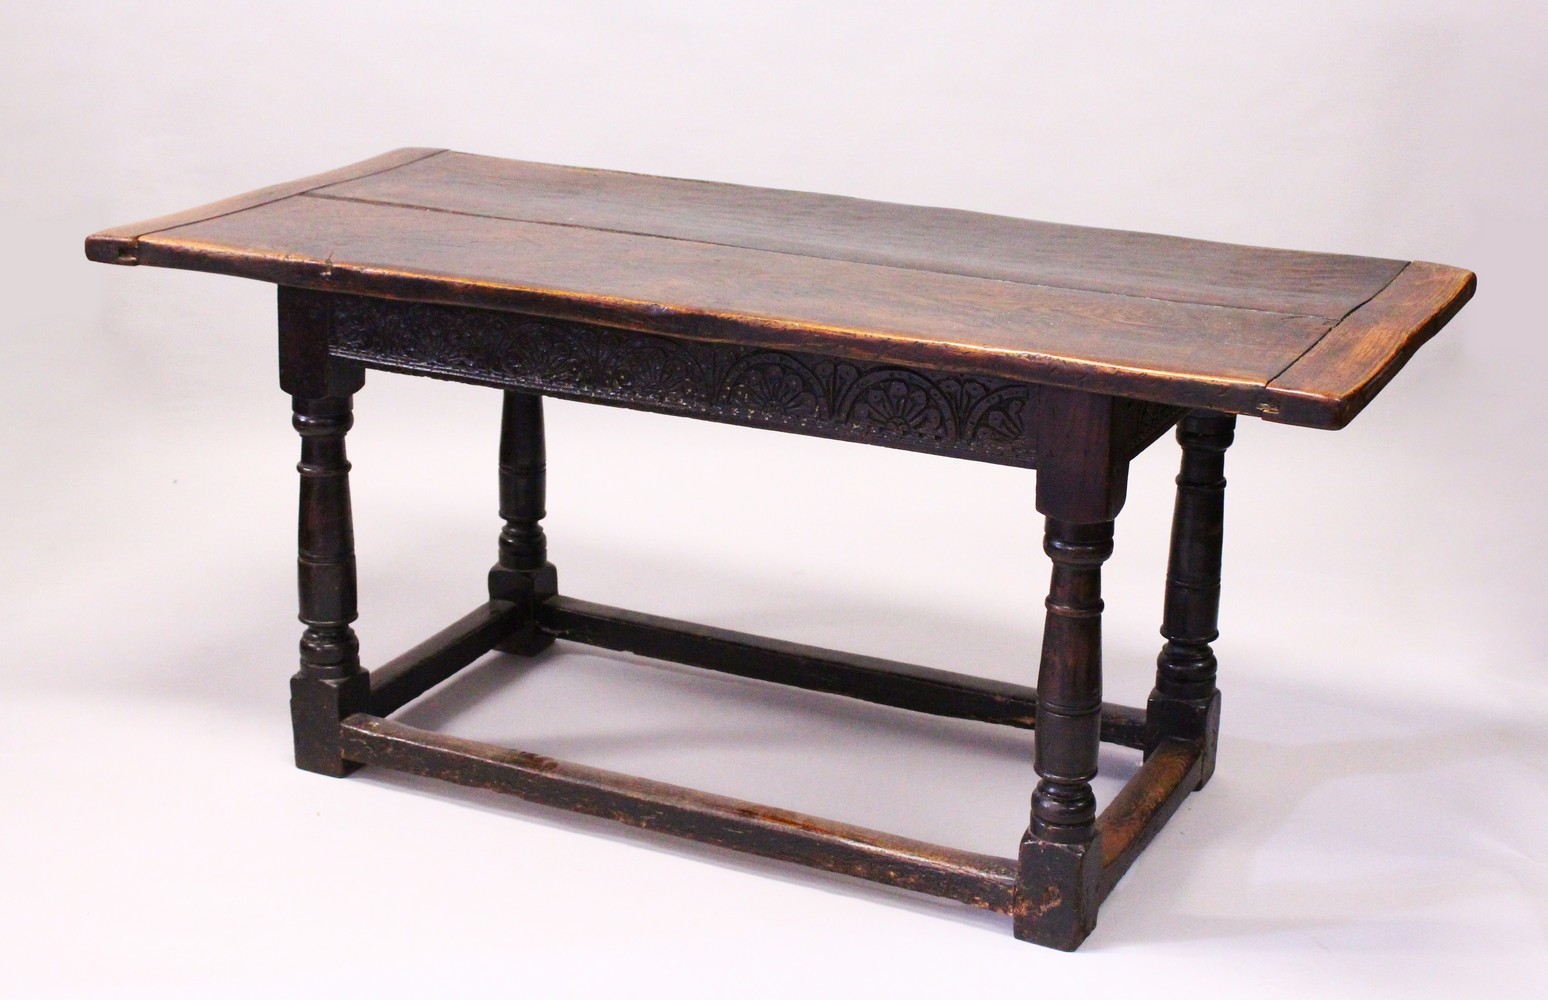 AN 18TH CENTURY OAK REFECTORY DINING TABLE, with a cleated twin plank top, on gun barrel turned legs